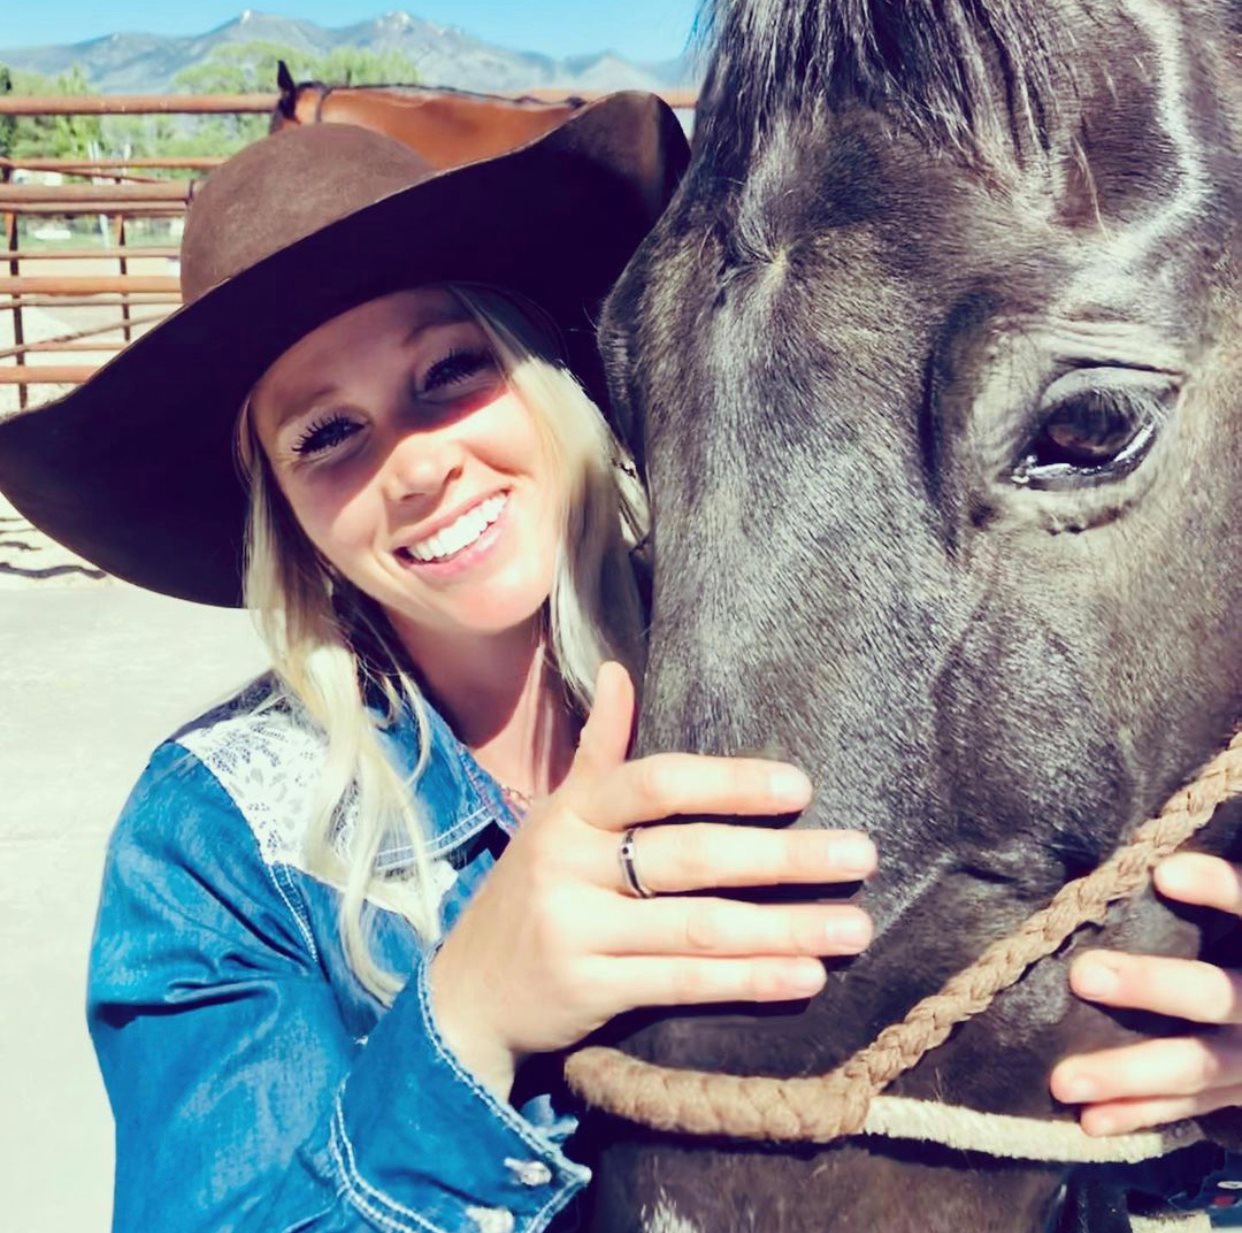 amberley snyder, power,  blaze ring, barrel racing, amberley snyder and power